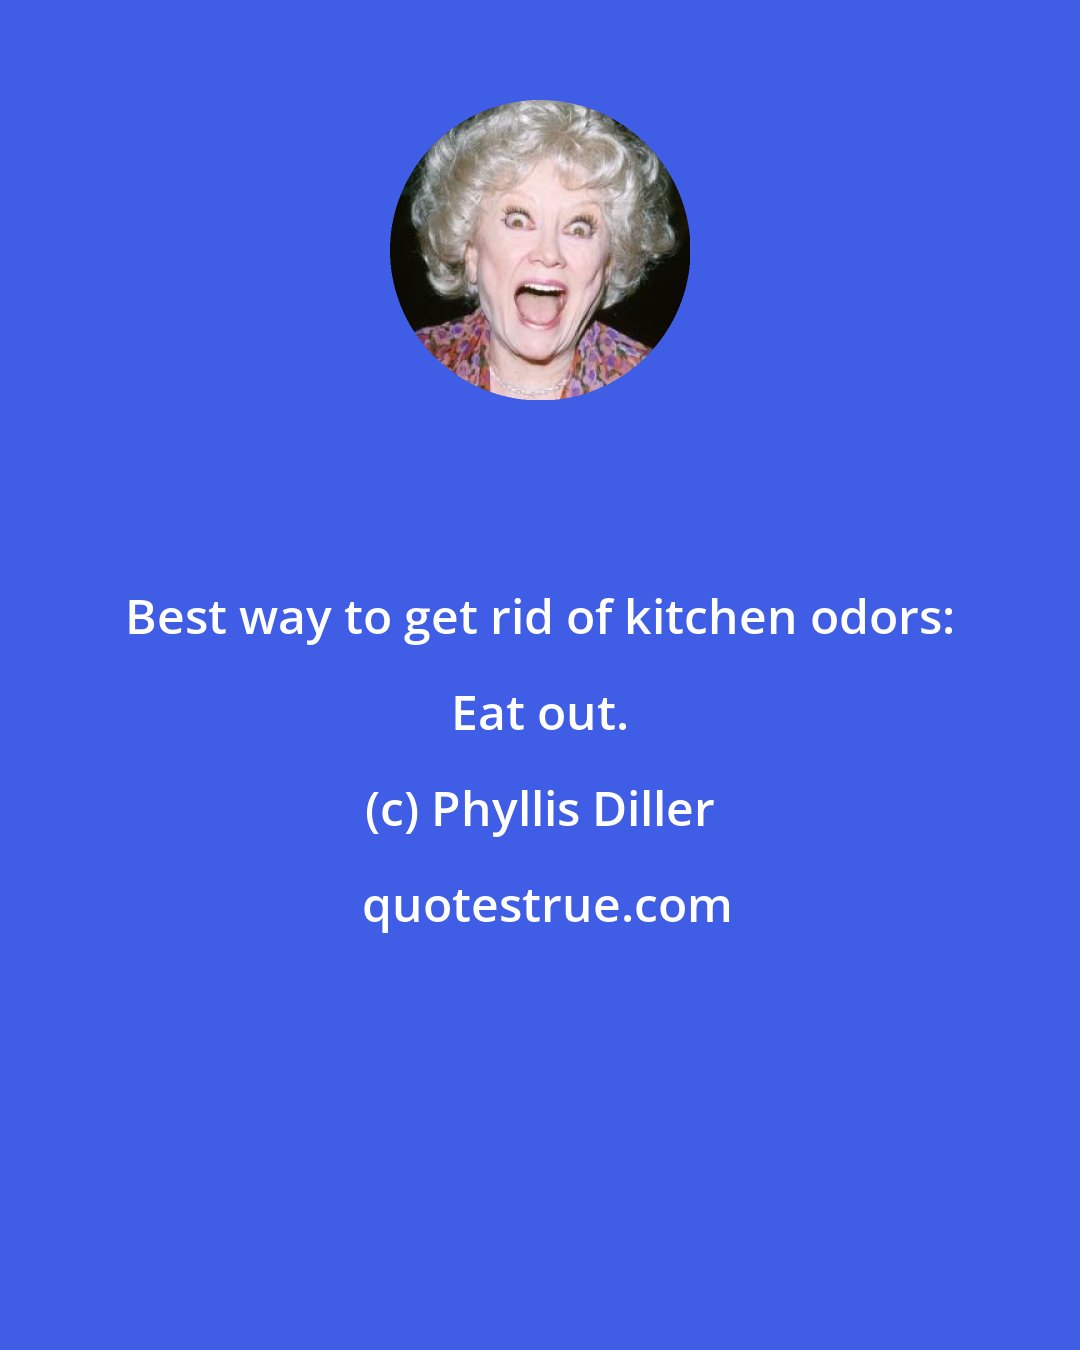 Phyllis Diller: Best way to get rid of kitchen odors: Eat out.